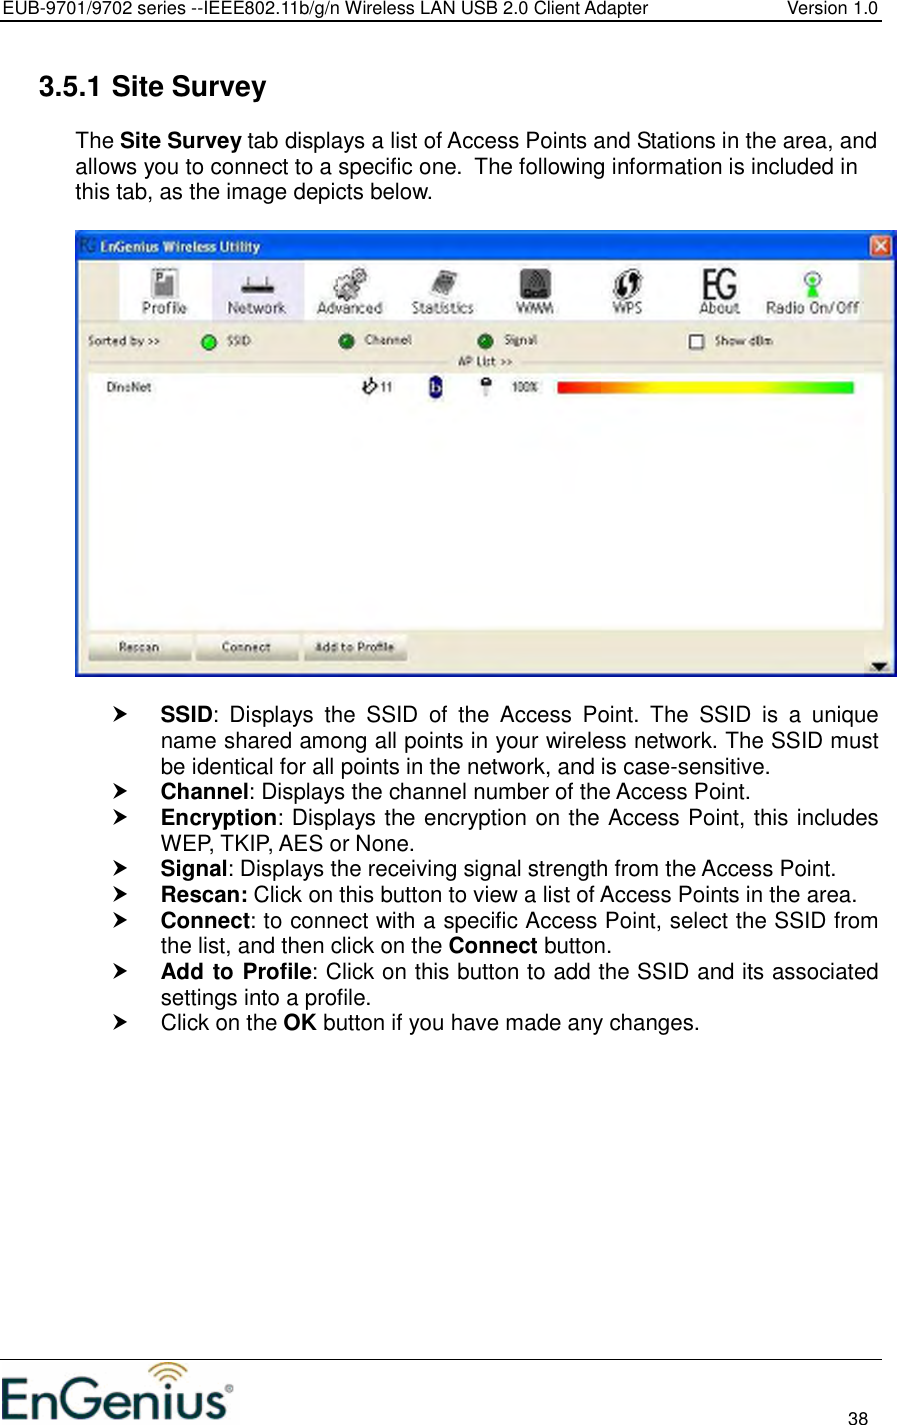 EUB-9701/9702 series --IEEE802.11b/g/n Wireless LAN USB 2.0 Client Adapter  Version 1.0                                                                                                                          38  3.5.1 Site Survey The Site Survey tab displays a list of Access Points and Stations in the area, and allows you to connect to a specific one.  The following information is included in this tab, as the image depicts below.     SSID:  Displays  the  SSID  of  the  Access  Point.  The  SSID  is  a  unique name shared among all points in your wireless network. The SSID must be identical for all points in the network, and is case-sensitive.  Channel: Displays the channel number of the Access Point.  Encryption: Displays the encryption on the Access Point, this includes WEP, TKIP, AES or None.   Signal: Displays the receiving signal strength from the Access Point.   Rescan: Click on this button to view a list of Access Points in the area.  Connect: to connect with a specific Access Point, select the SSID from the list, and then click on the Connect button.  Add to Profile: Click on this button to add the SSID and its associated settings into a profile.    Click on the OK button if you have made any changes.  